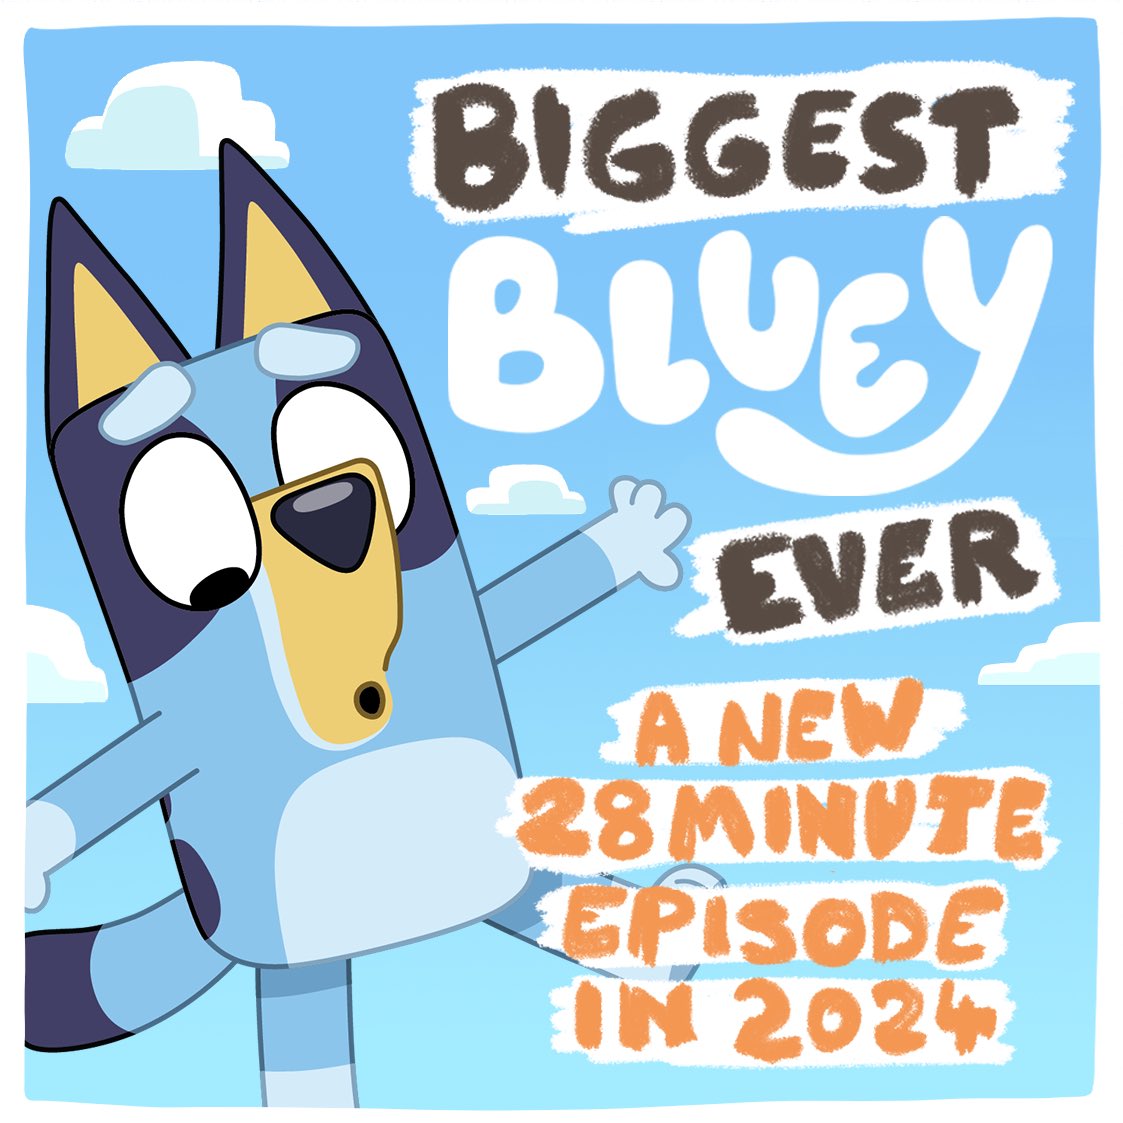 new *big bluey episode coming worldwide in 2024! 🌎 ❤️ love you to share with your Bluey friends and family 💙 📺 #bluey